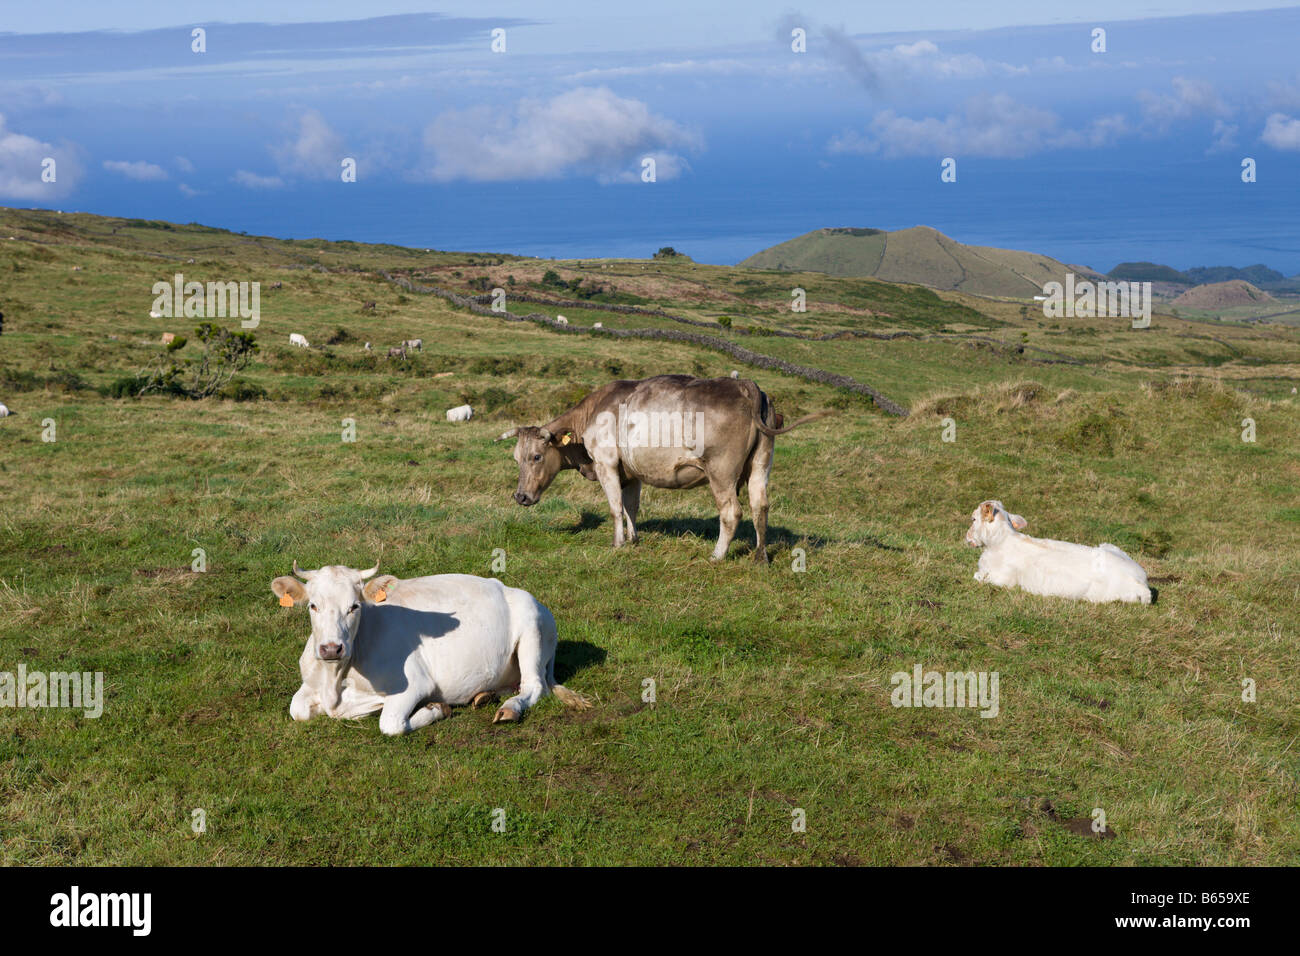 Cows on the Field Bos taurus Pico Island Azores Portugal Stock Photo